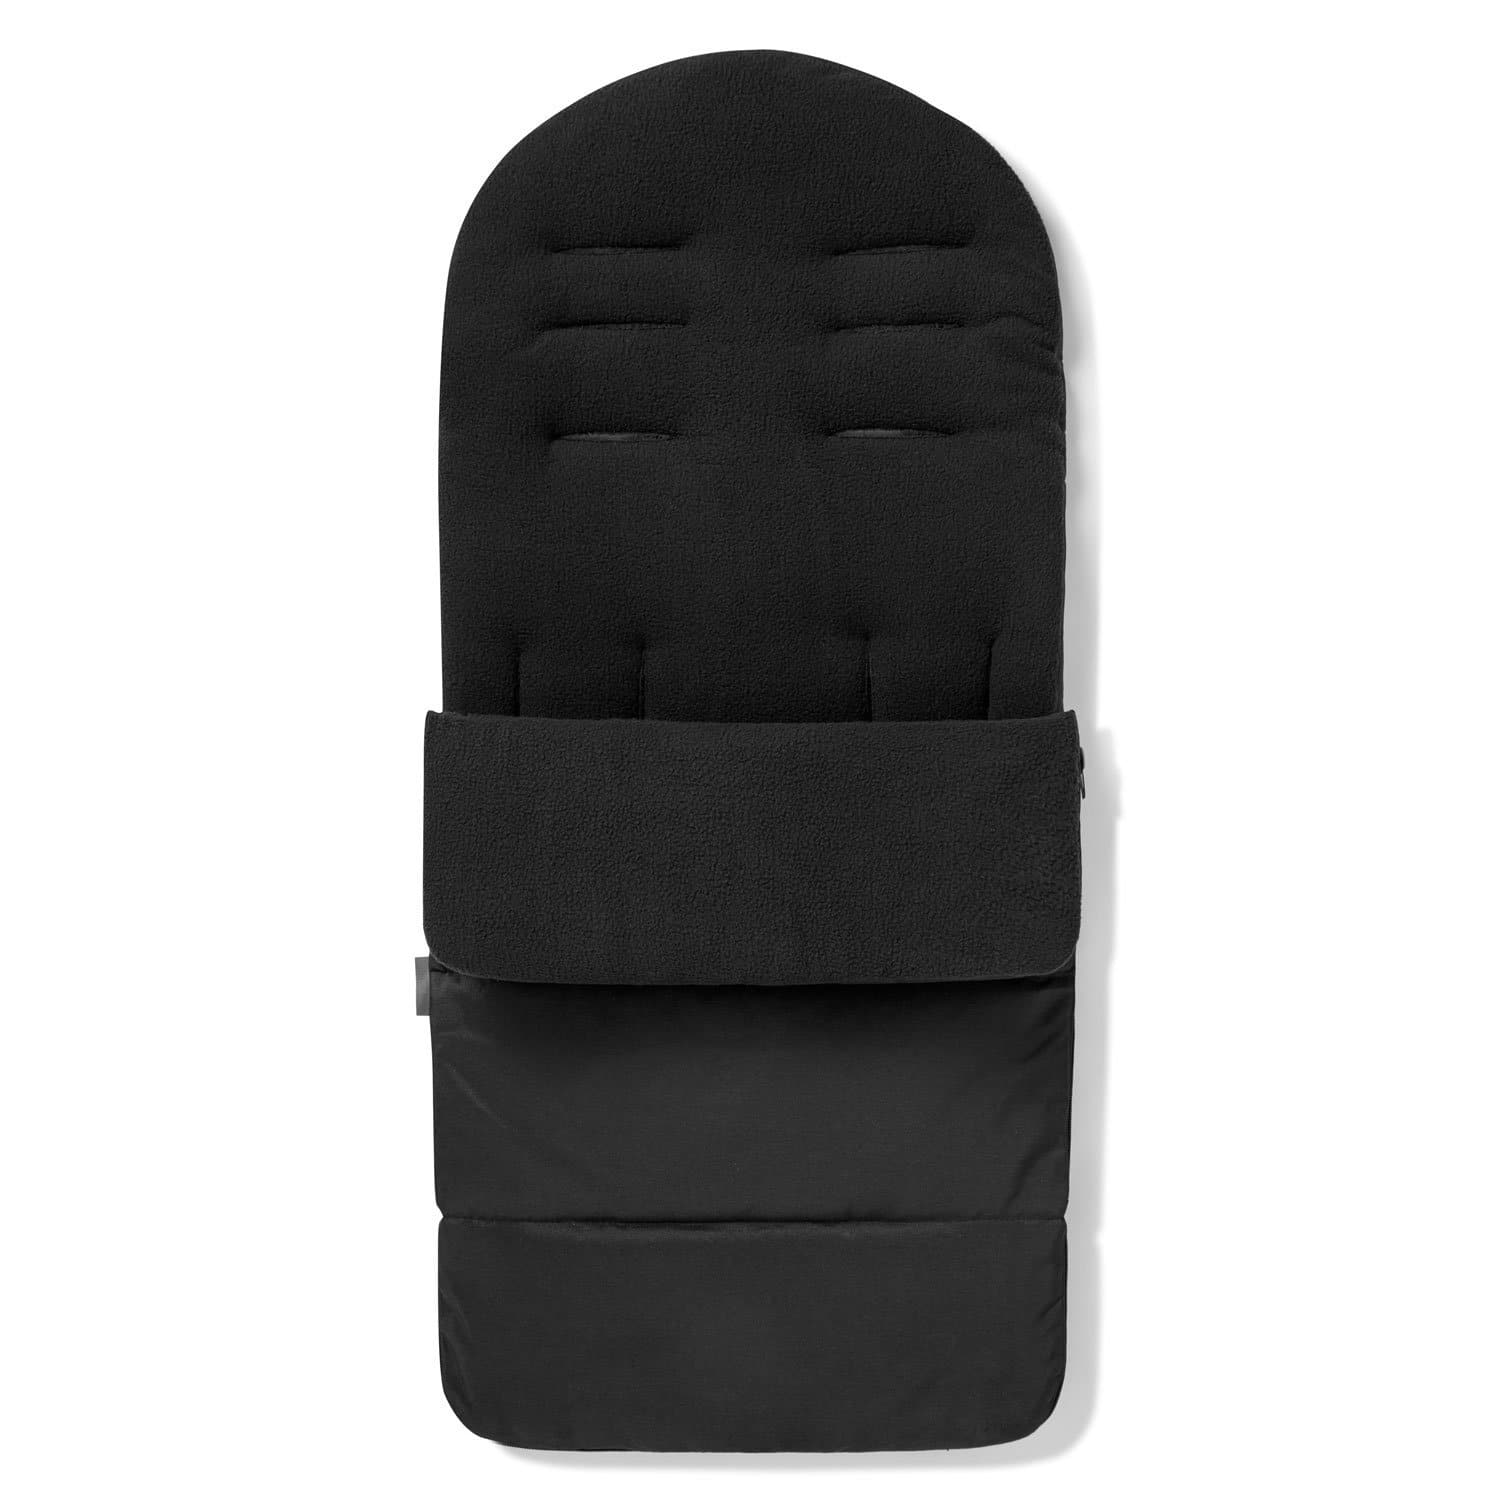 Premium Footmuff / Cosy Toes Compatible with Safety 1st - Black Jack / Fits All Models | For Your Little One